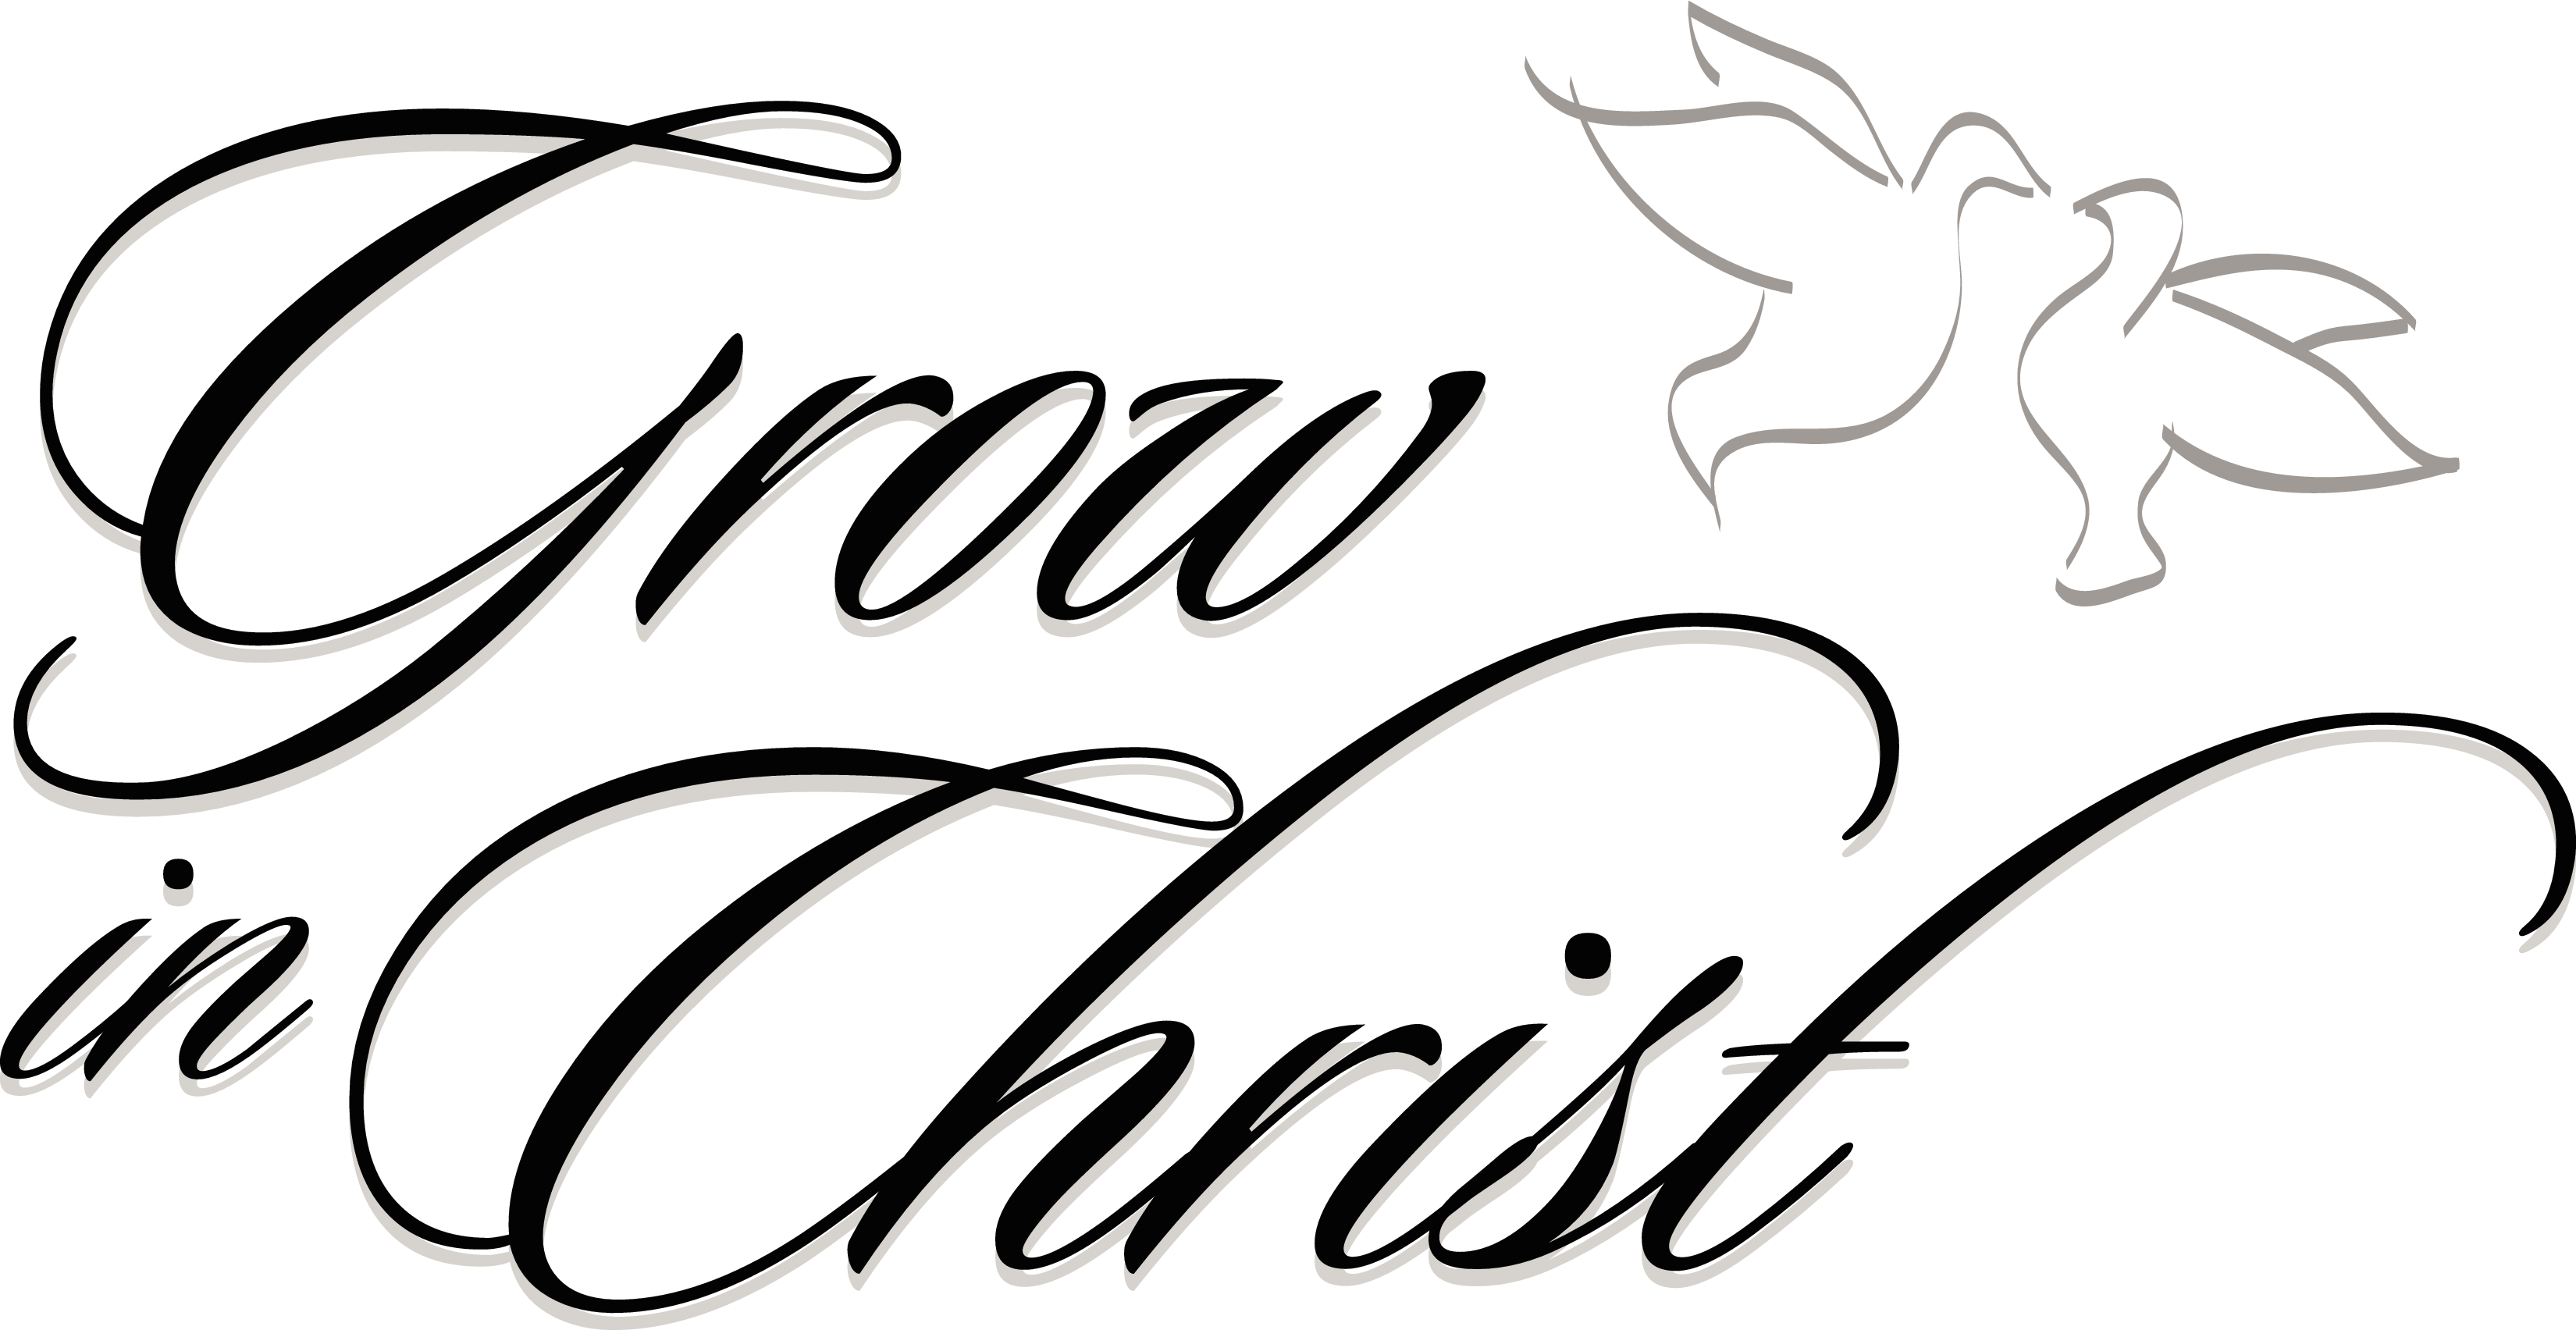 free christian clipart images - photo #20